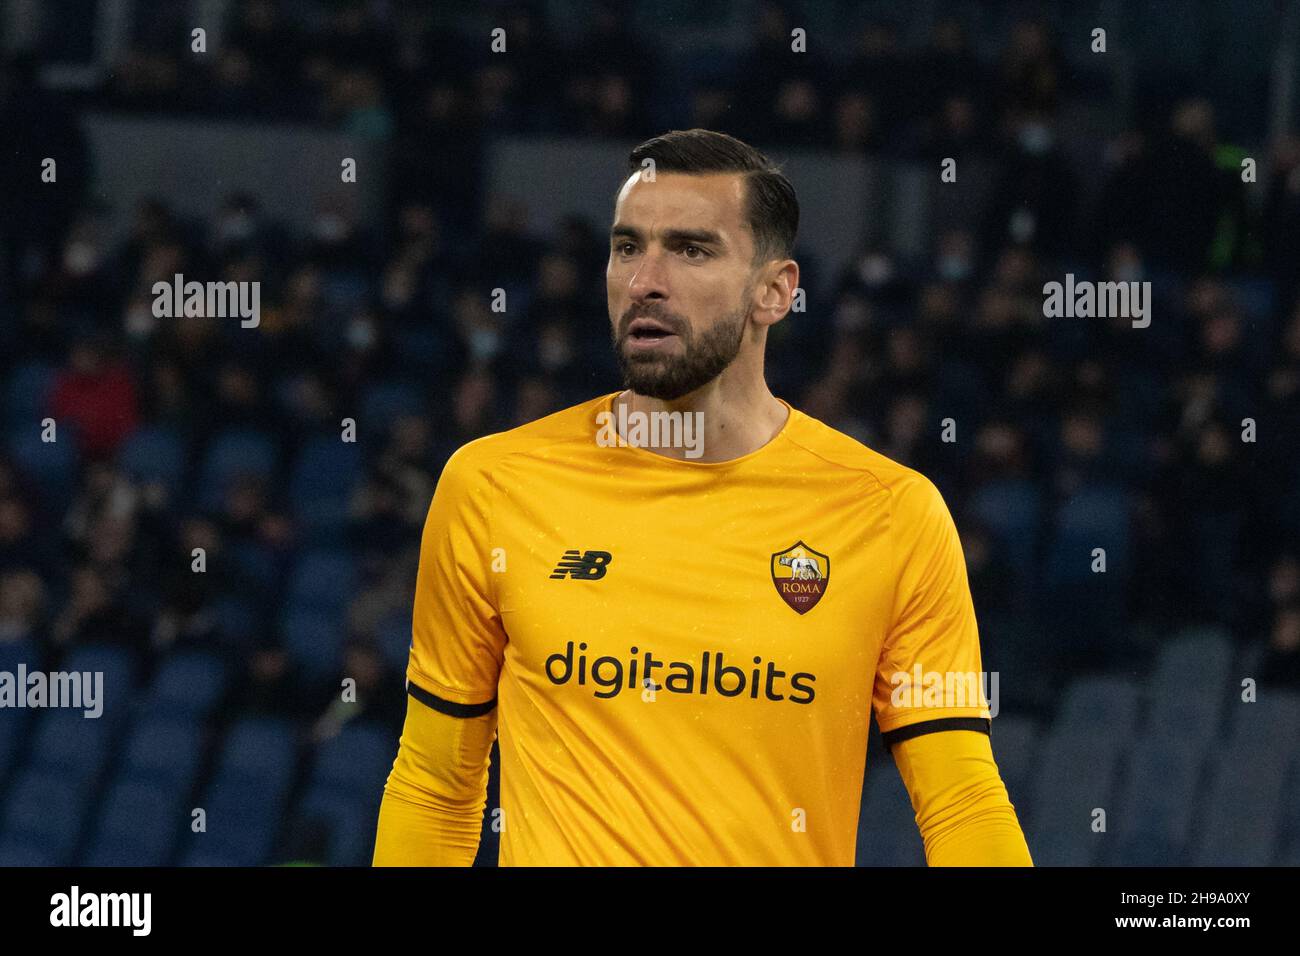 Rome, Italy. 4th December, 2021. Rui Patricio of AS Roma in action during the Serie A football championship between AS Roma and Fc Inter at the Olympic Stadium. Credit: Cosimo Martemucci / Alamy Live News Stock Photo